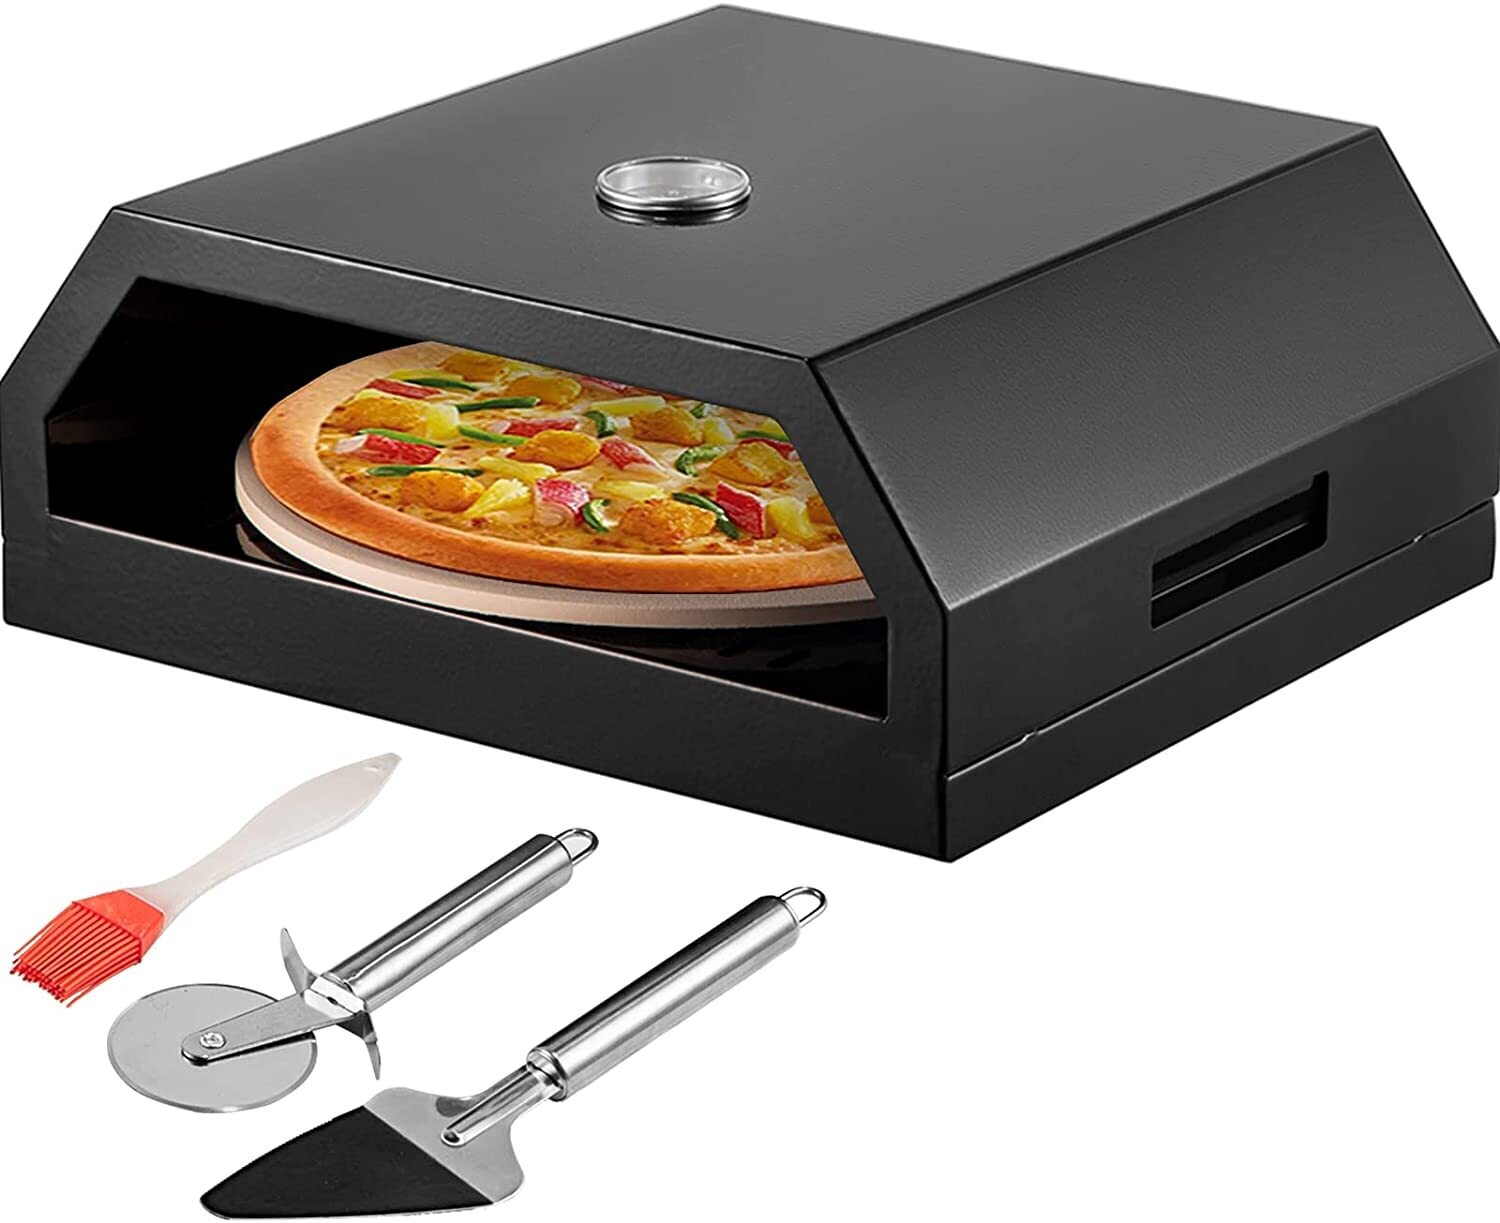 Pizza Oven Kit with Set of Professional Pizza Baking Tools